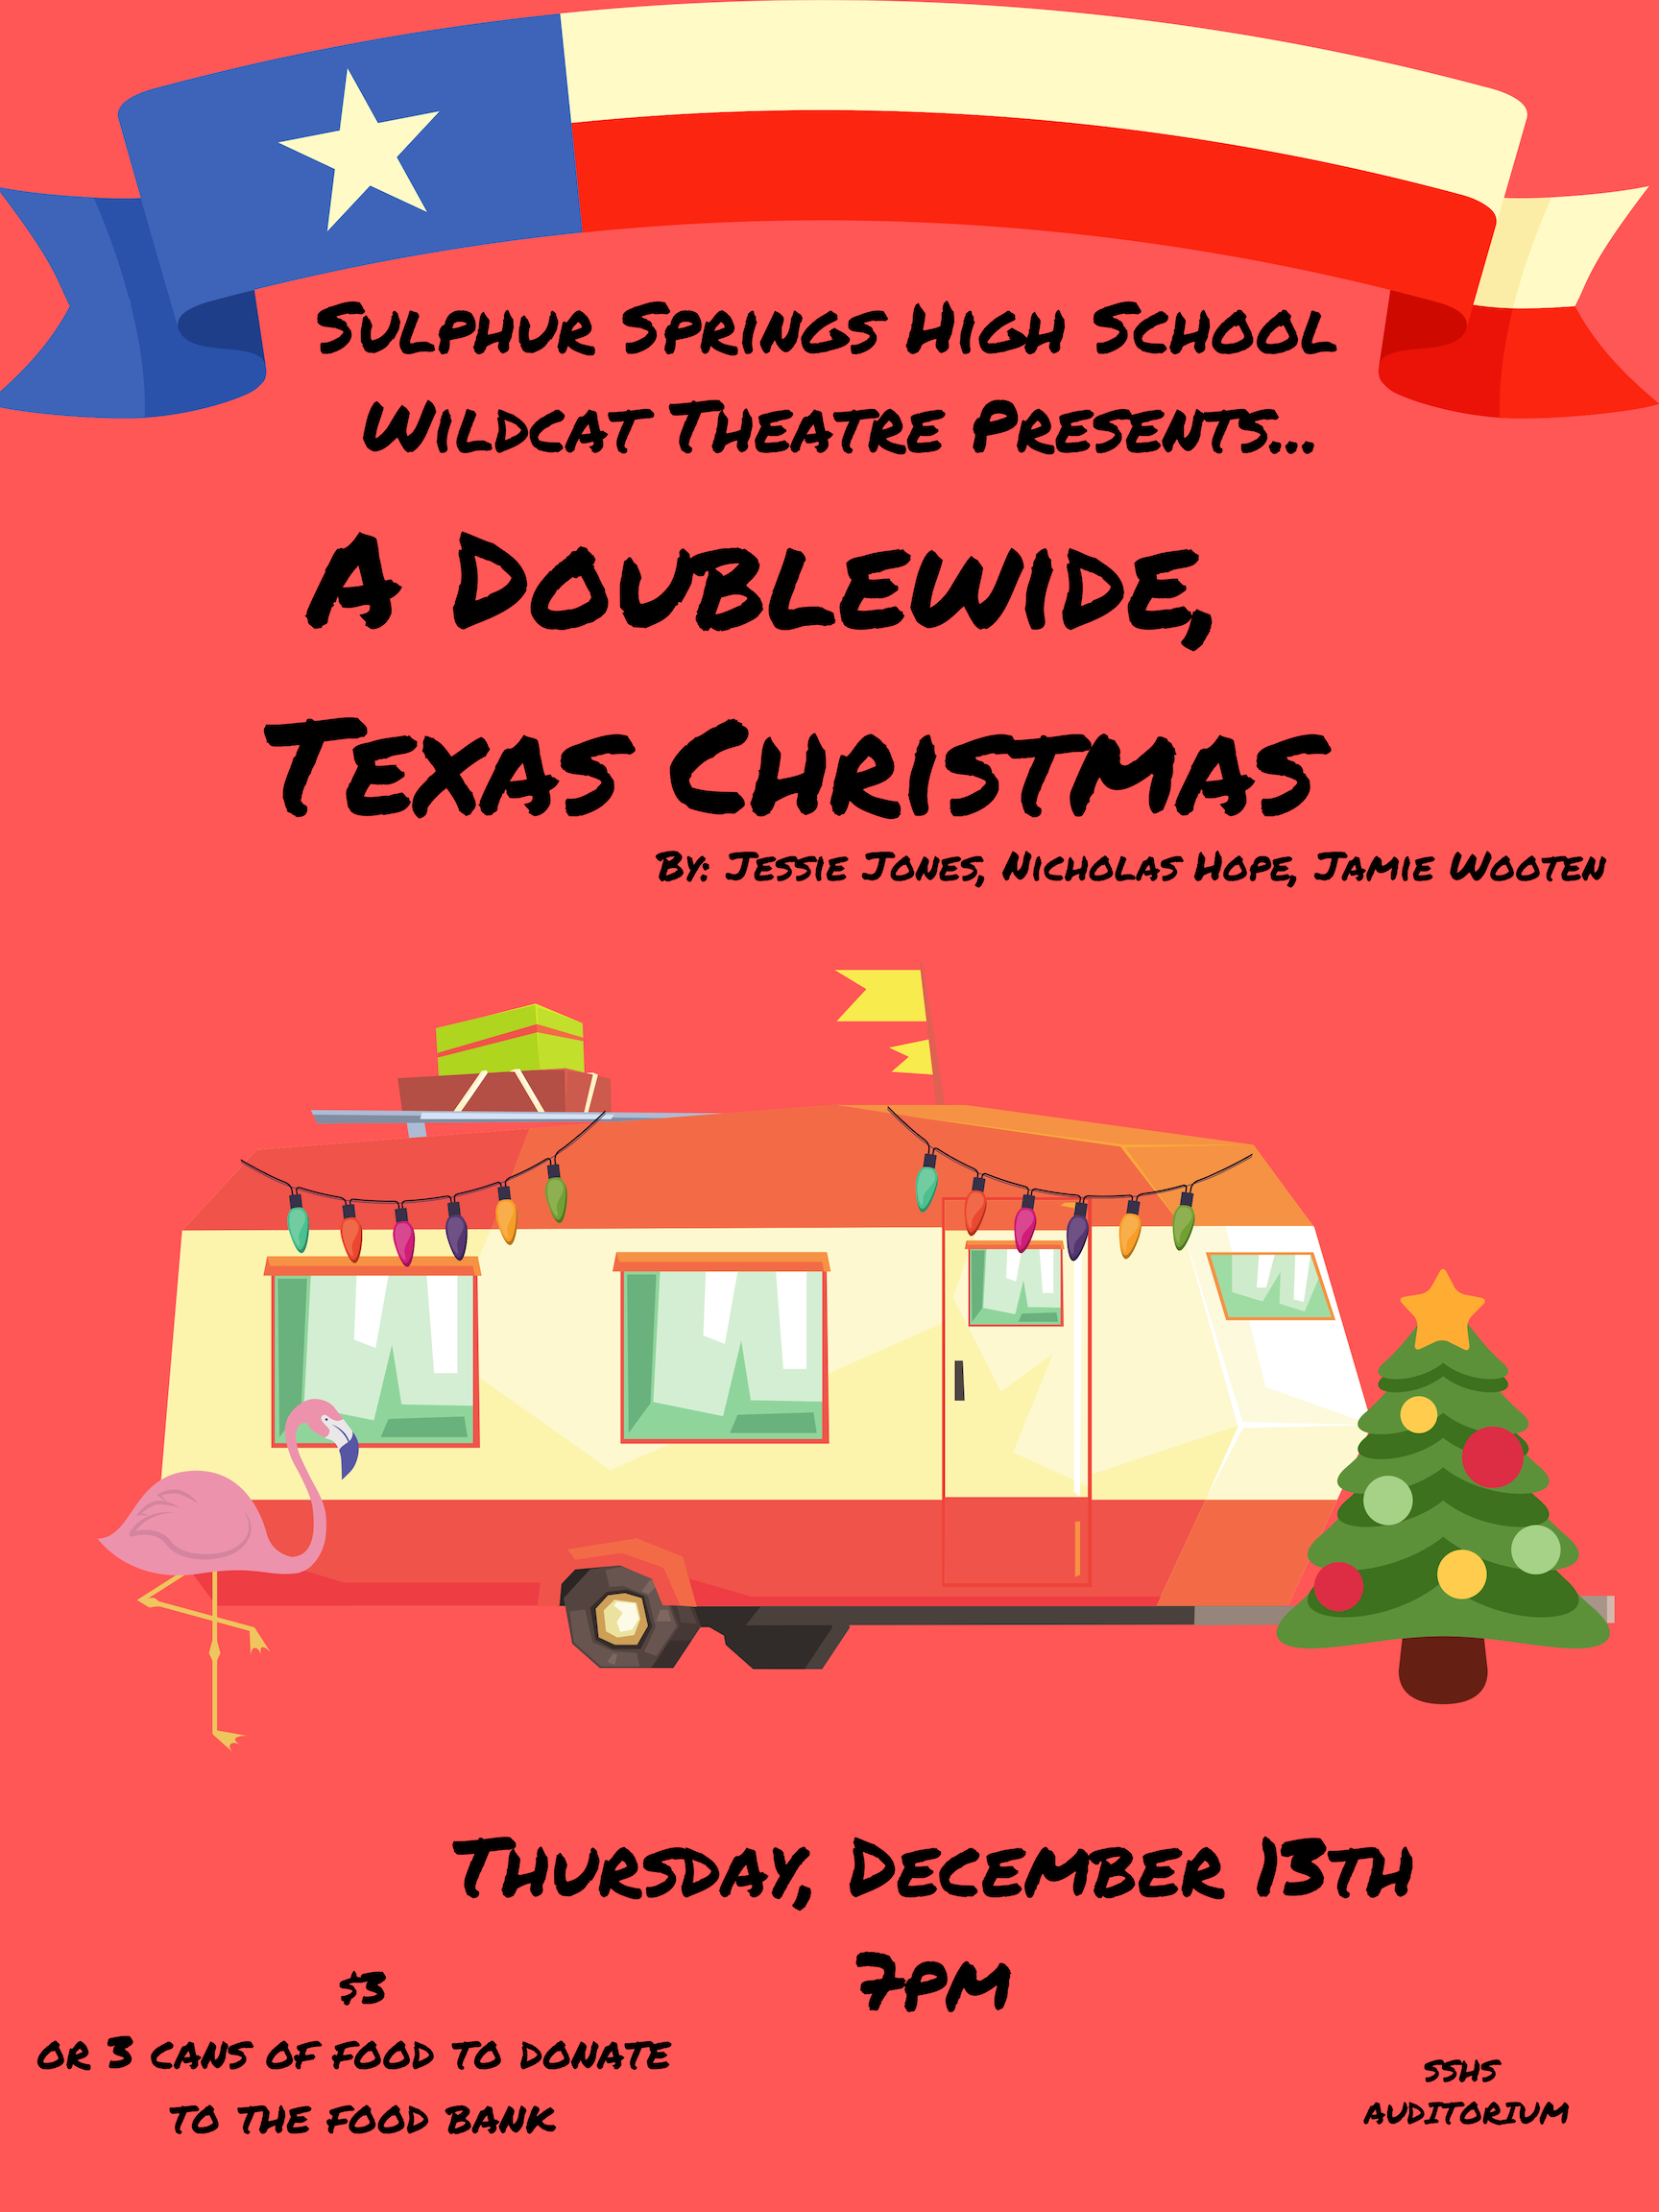 SSHS Wildcat Theatre Performing ‘A Doublewide, Texas Christmas’ on Thursday December 13th